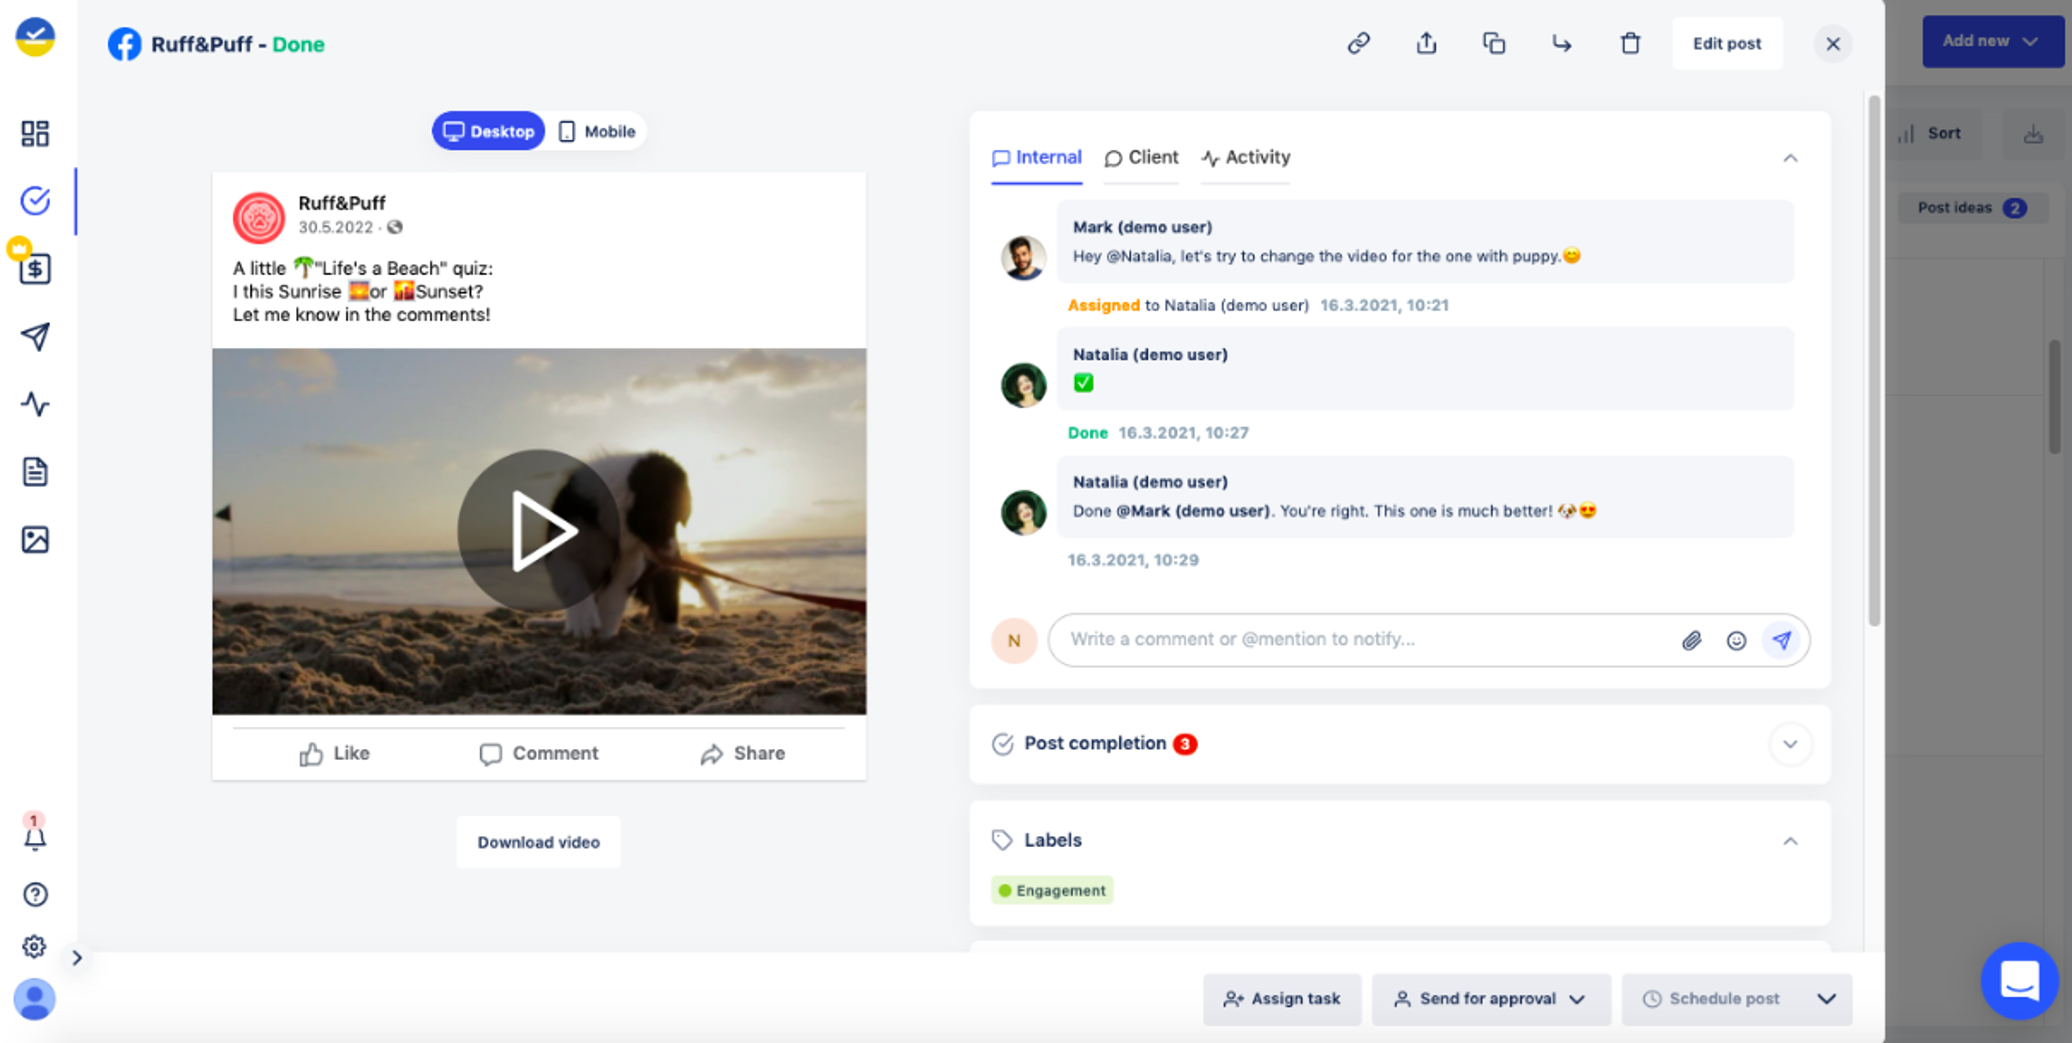 Kontentino Software - See exactly how your posts gonna look like when live on a specific social media platform. Comment & collaborate with your team or client in separated sections right next to the post preview. Notify other users, send the post for approval or assign a task.